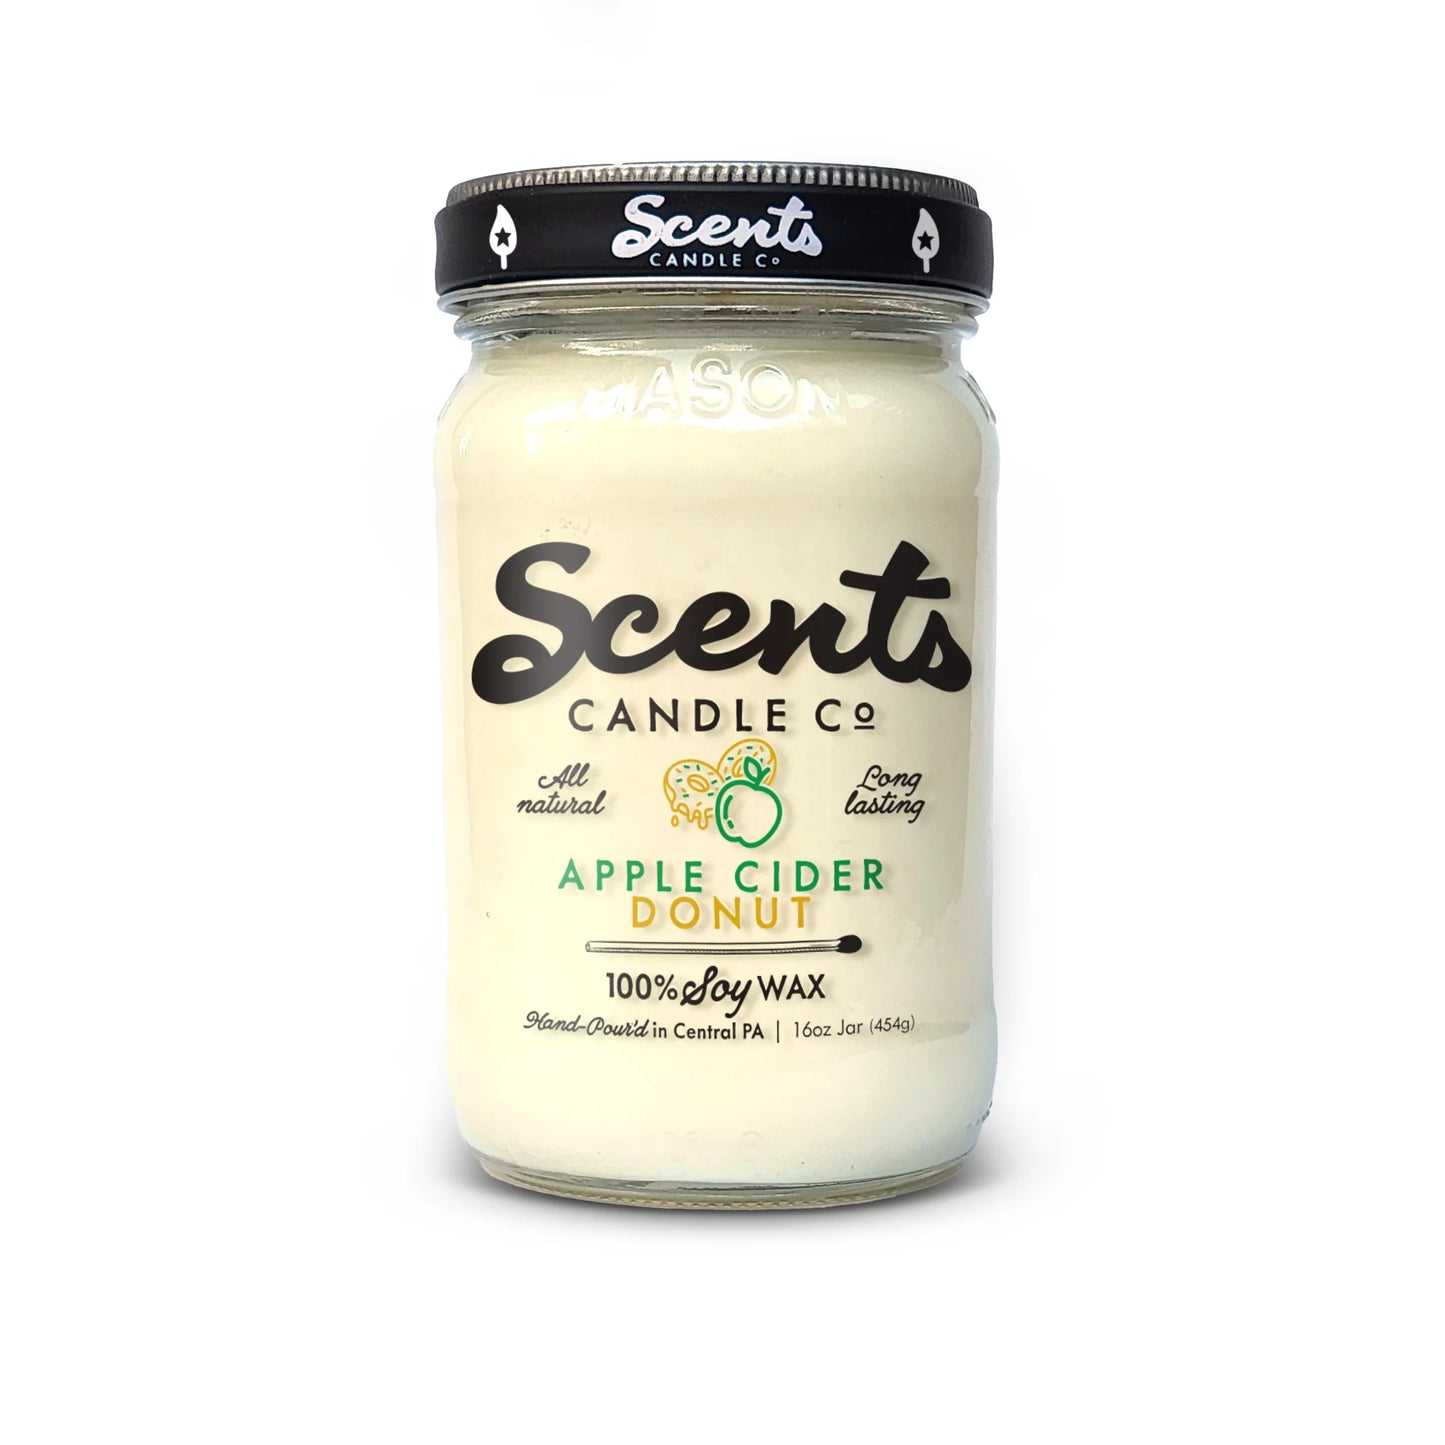 Scents Candle Co. Apple Cider Donut Soy Wax Candles